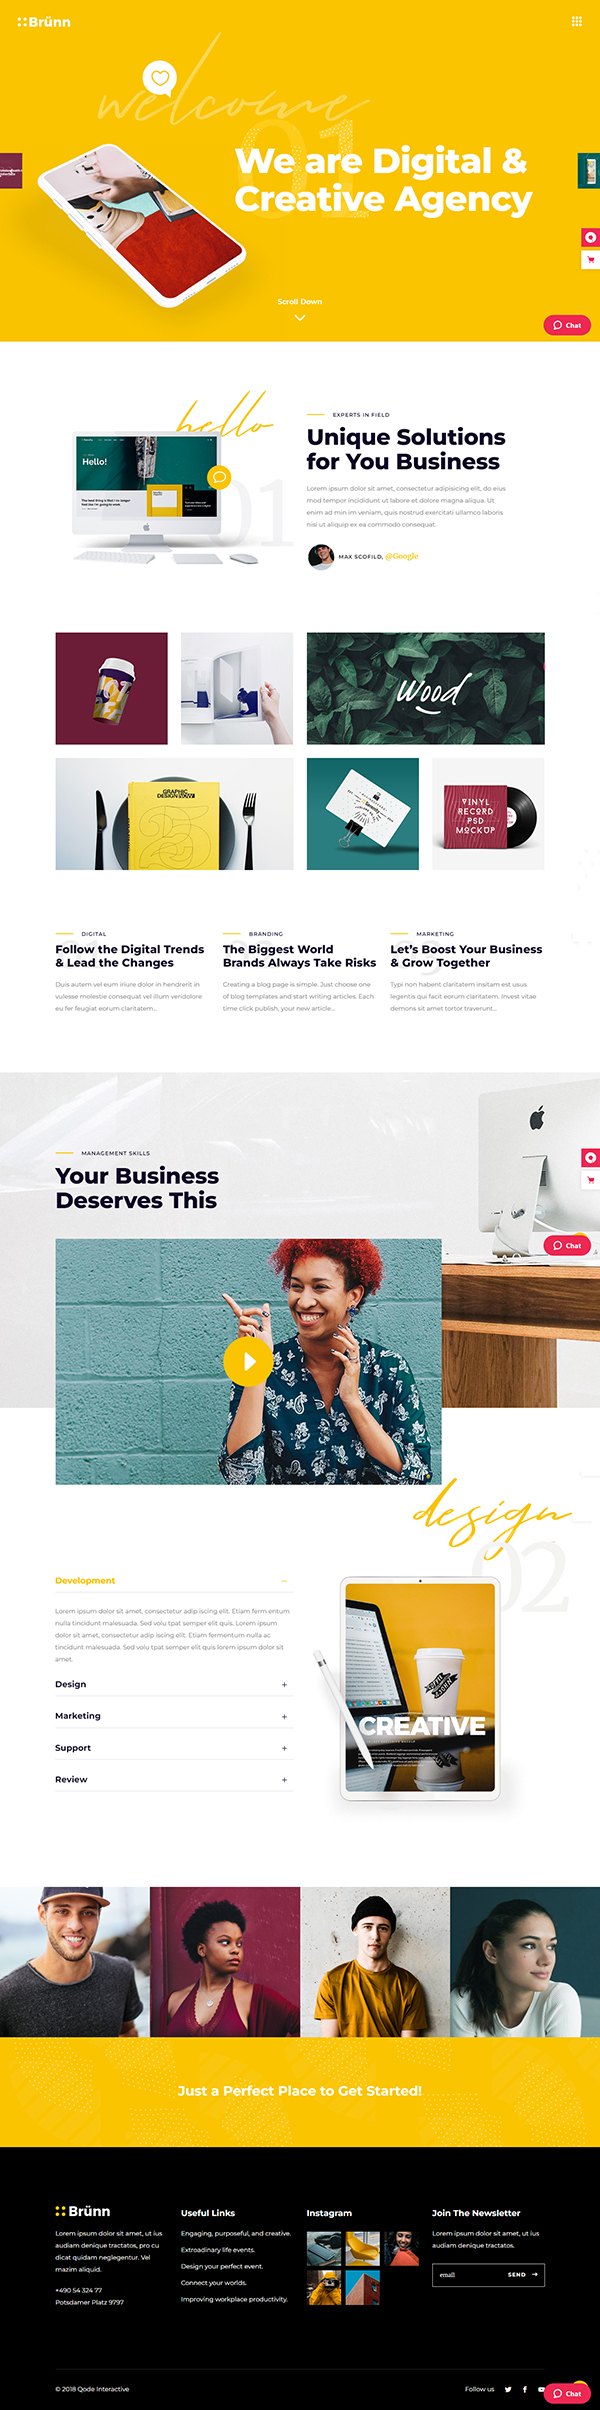 Brünn is a remarkable WordPress theme specifically made for creative agencies and all sorts of creative business websites. Its highly practical elements and powerful features are perfect for building modern business websites.Brünn – Creative Agency Theme